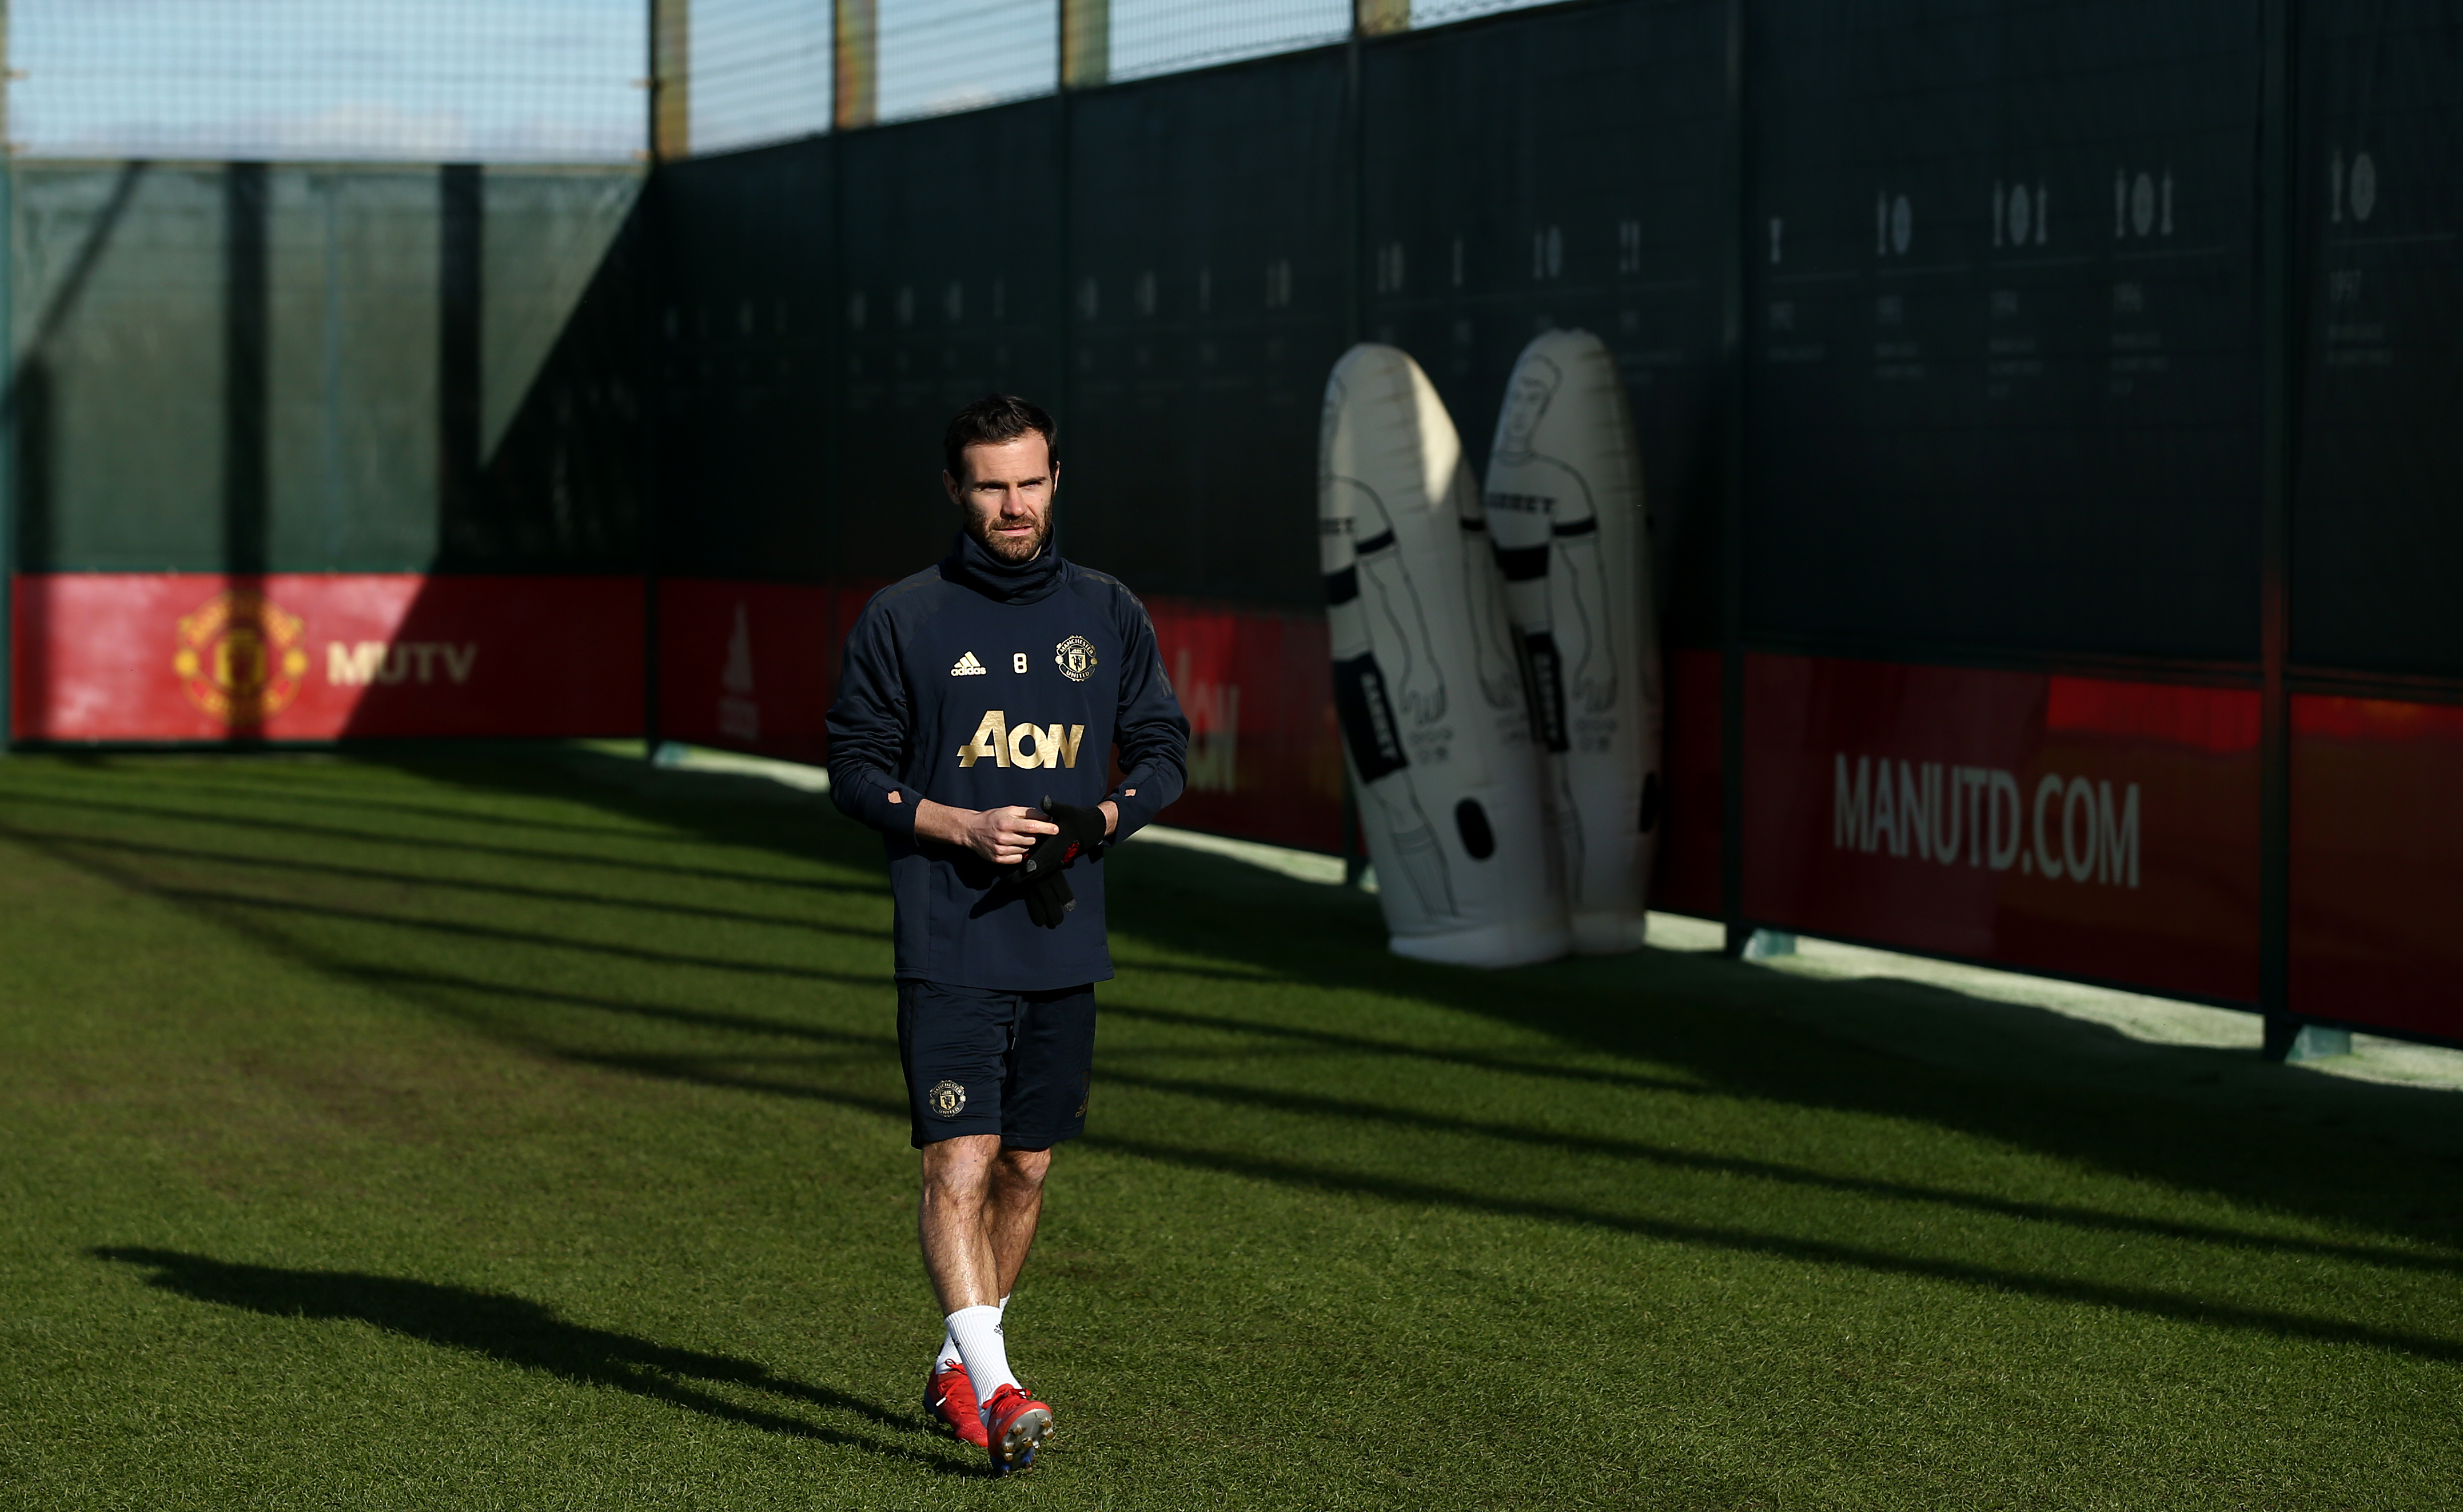 MANCHESTER, ENGLAND - FEBRUARY 11: Juan Mata of Manchester United arrives for a training session ahead of their UEFA Champions League Round of 16 match against Paris Saint-Germain F.C. at Aon Training Complex on February 11, 2019 in Manchester, England. (Photo by Jan Kruger/Getty Images)